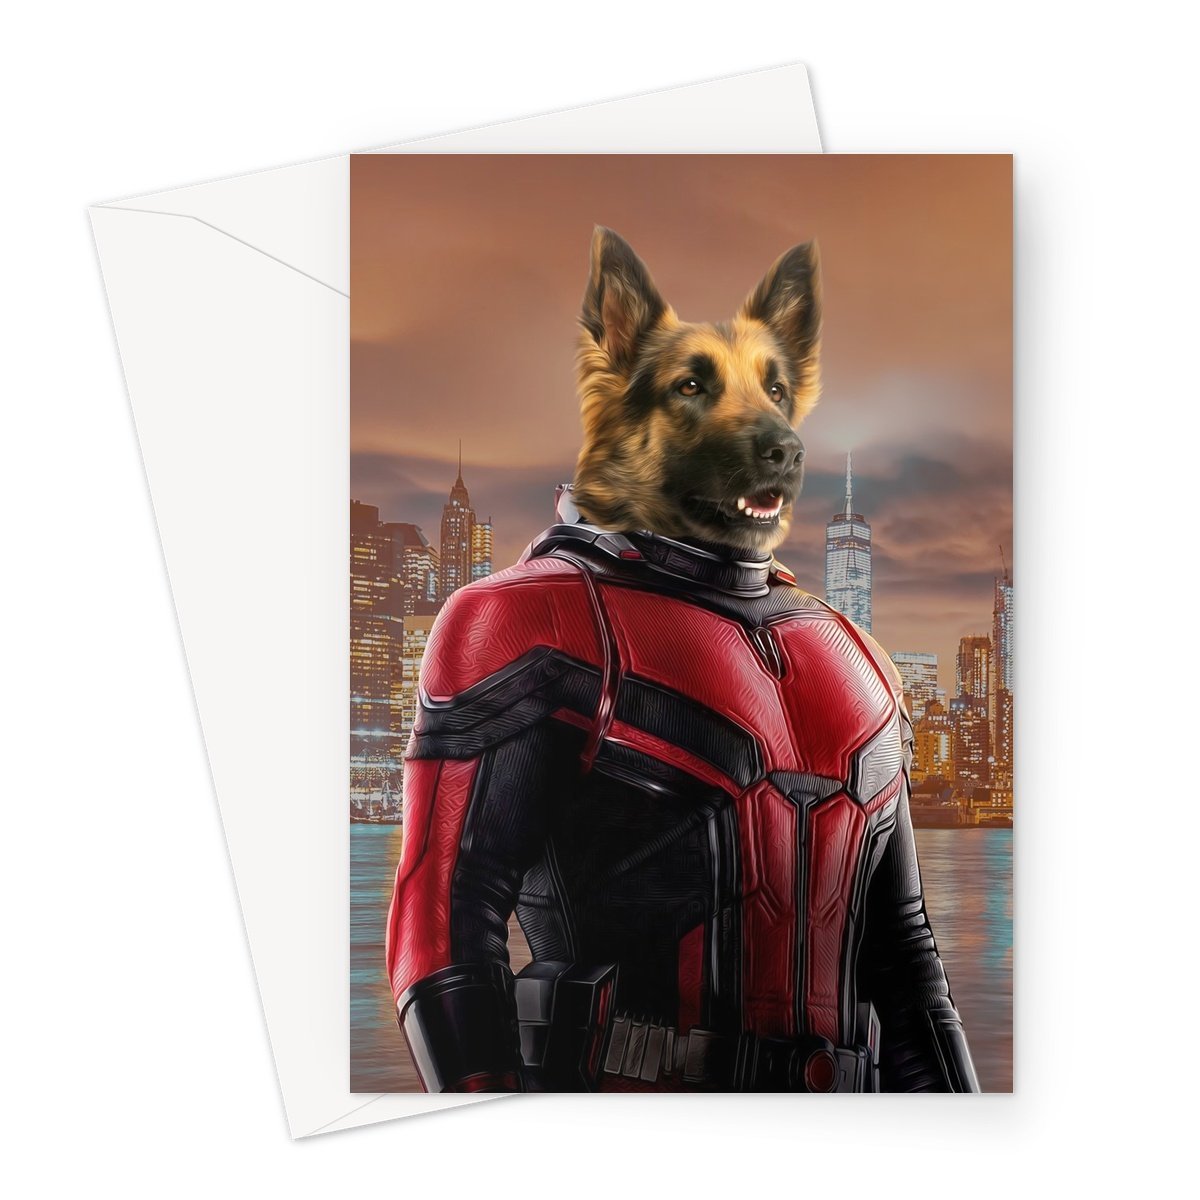 The Ant Man: Custom Pet Greeting Card - Paw & Glory - #pet portraits# - #dog portraits# - #pet portraits uk#pet portraits on canvas, send a picture of your dog stuffed animal, paintings of pets from photos, pet portraits, dog caricatures, turn pet photos to art, Crownandpaw